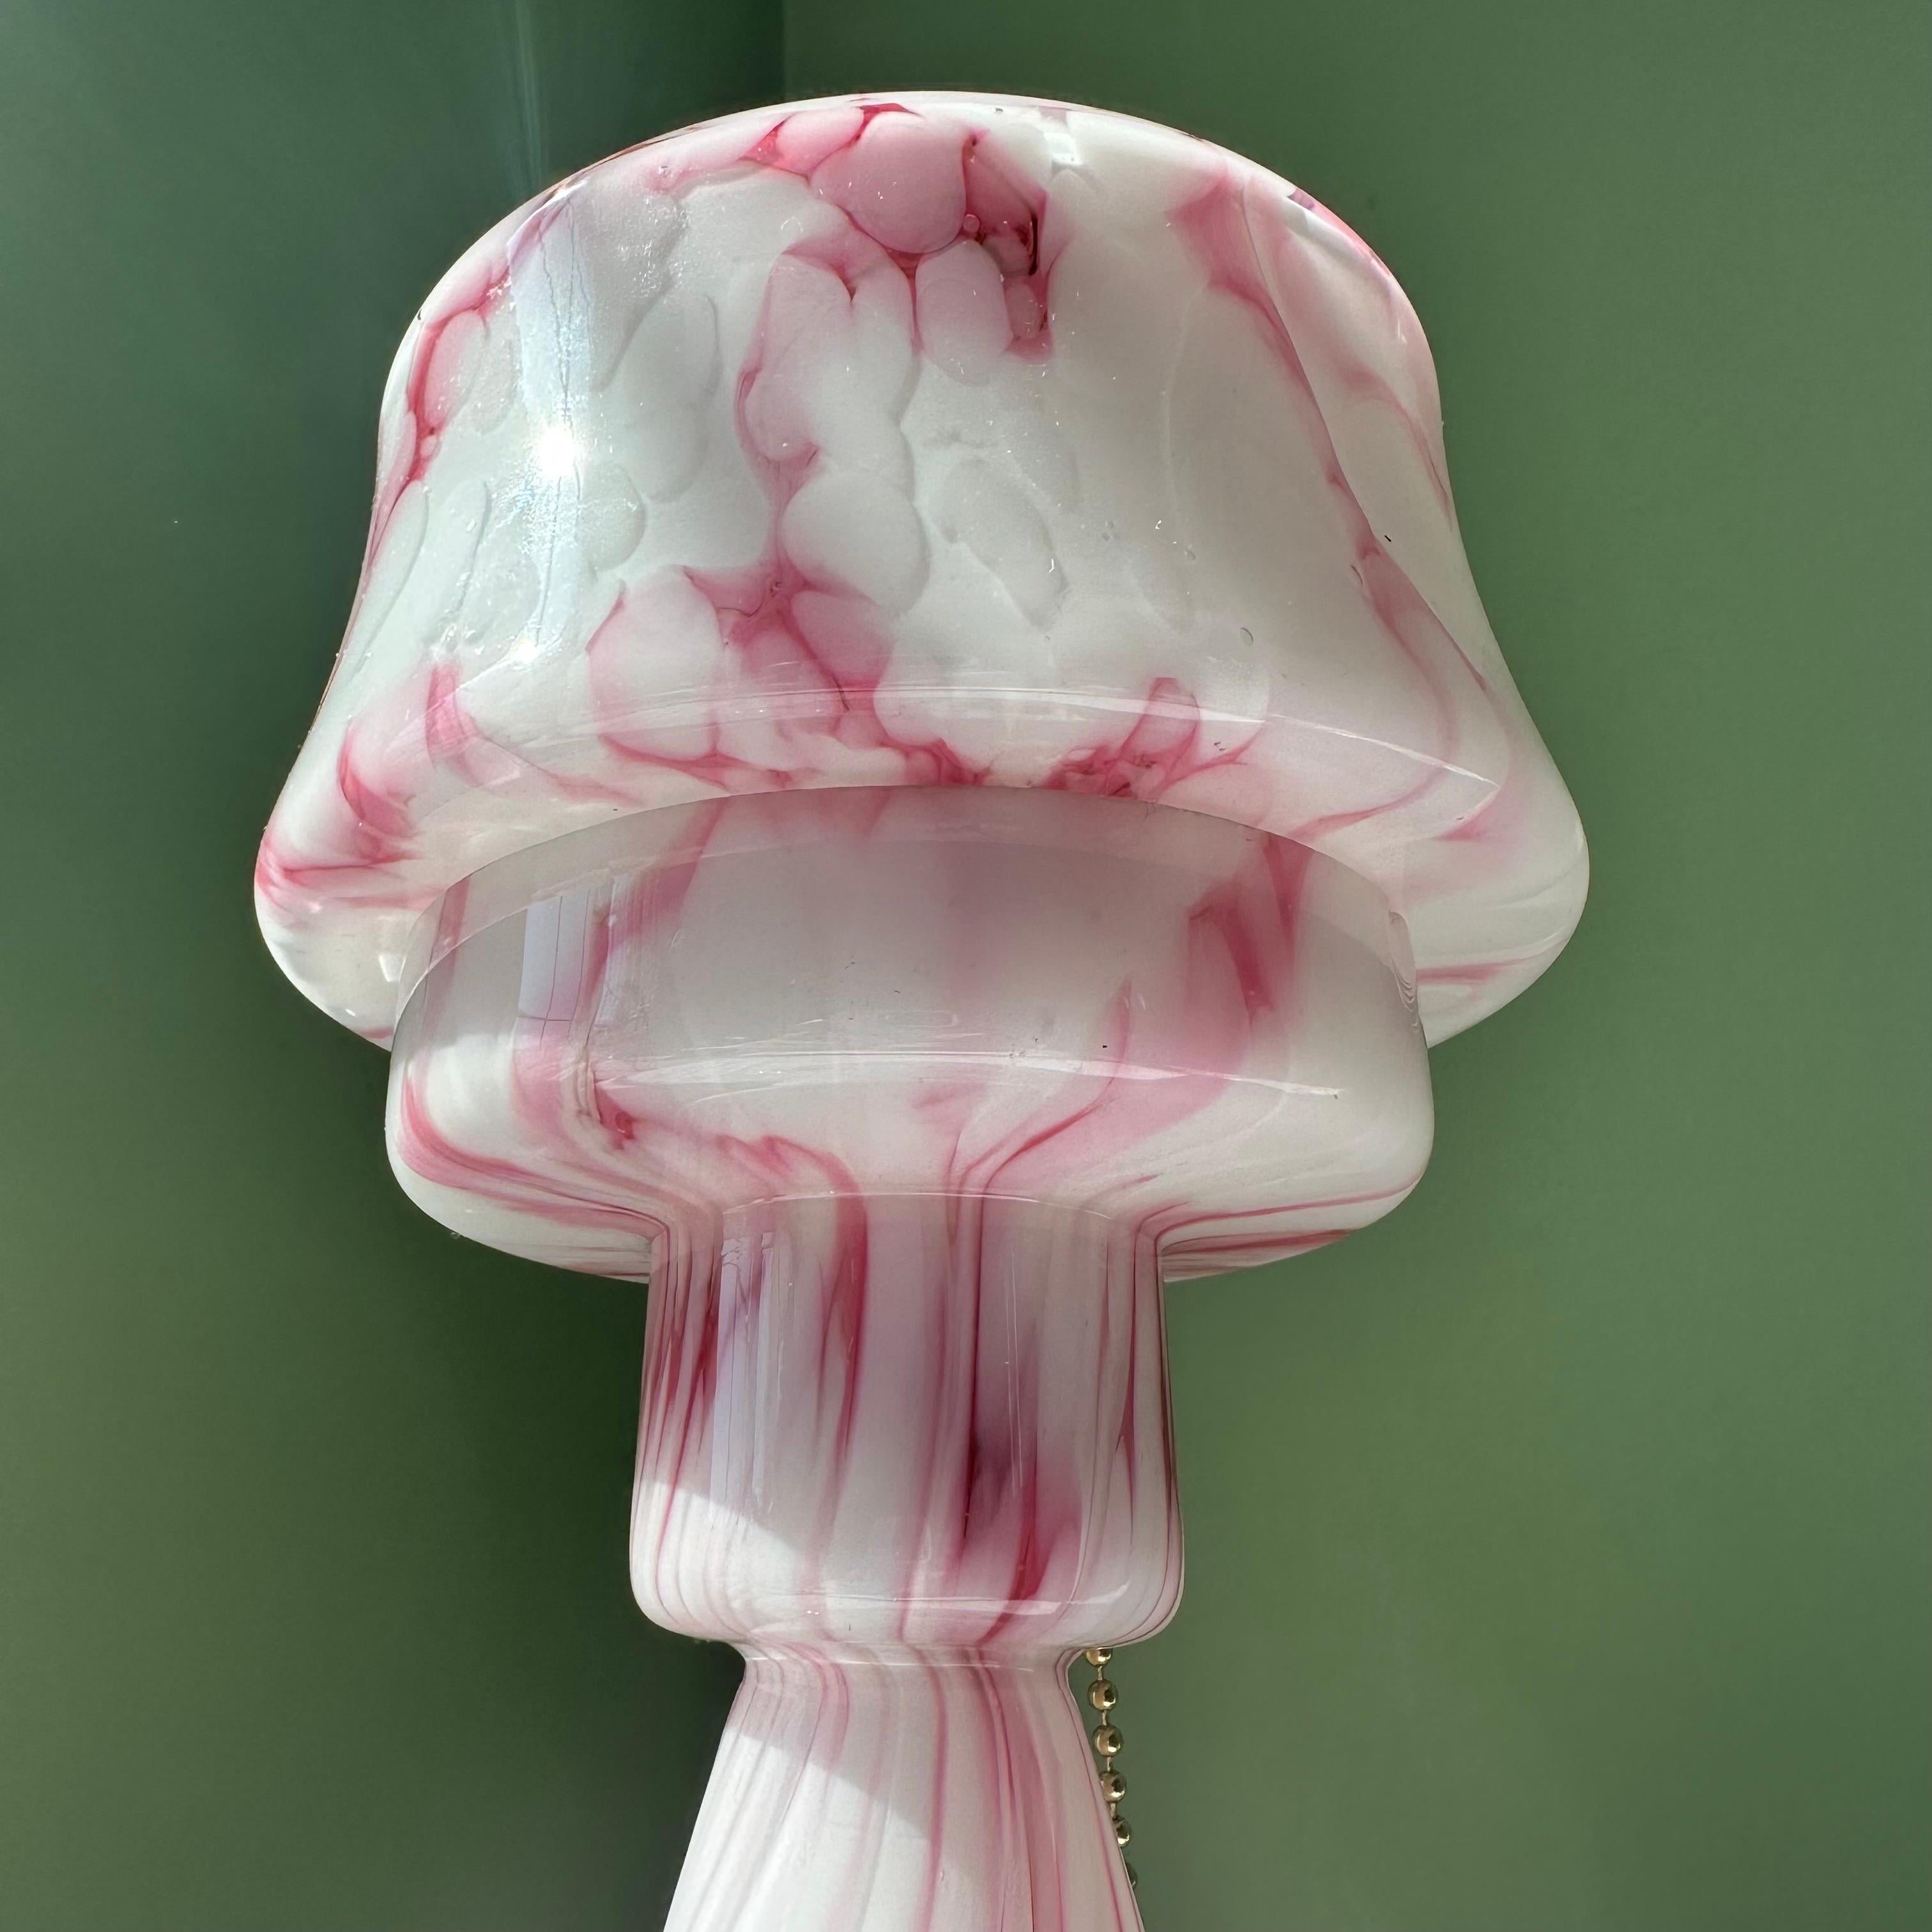 Mid-20th Century Pink and White Modernist Art Deco Glass Mushroom Table Lamp For Sale